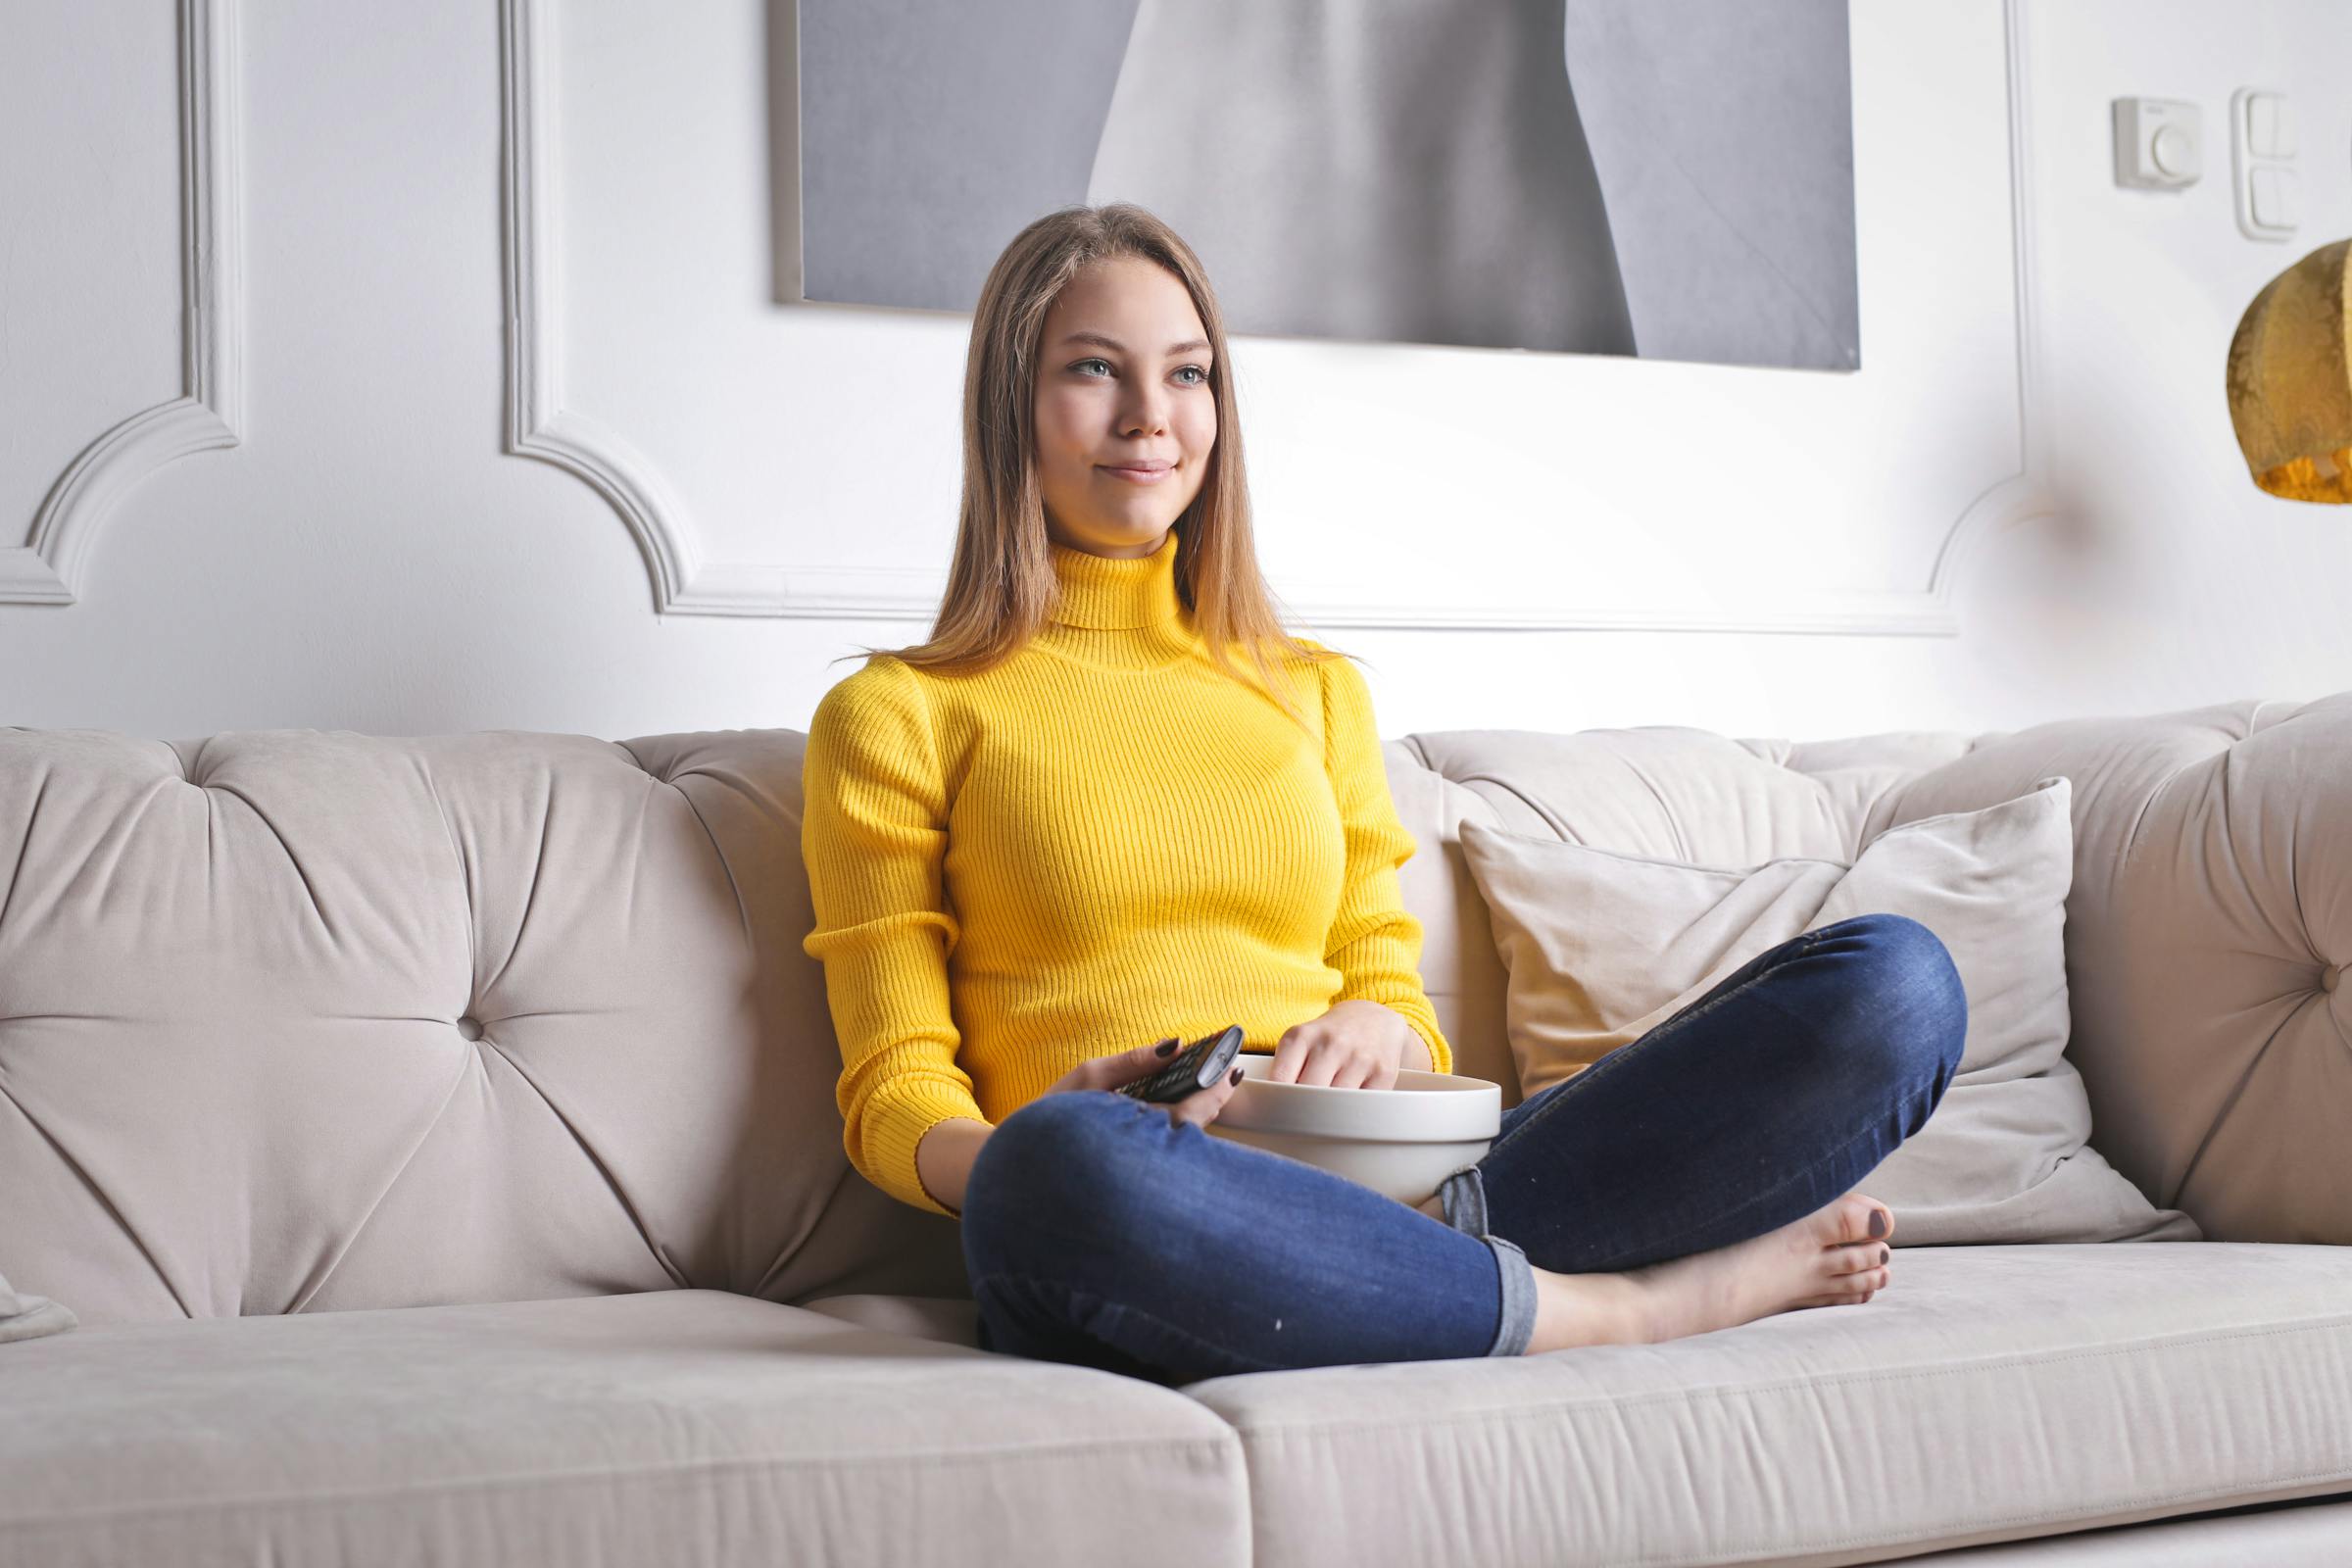 Woman sitting on a couch with popcorn | Source: Pexels